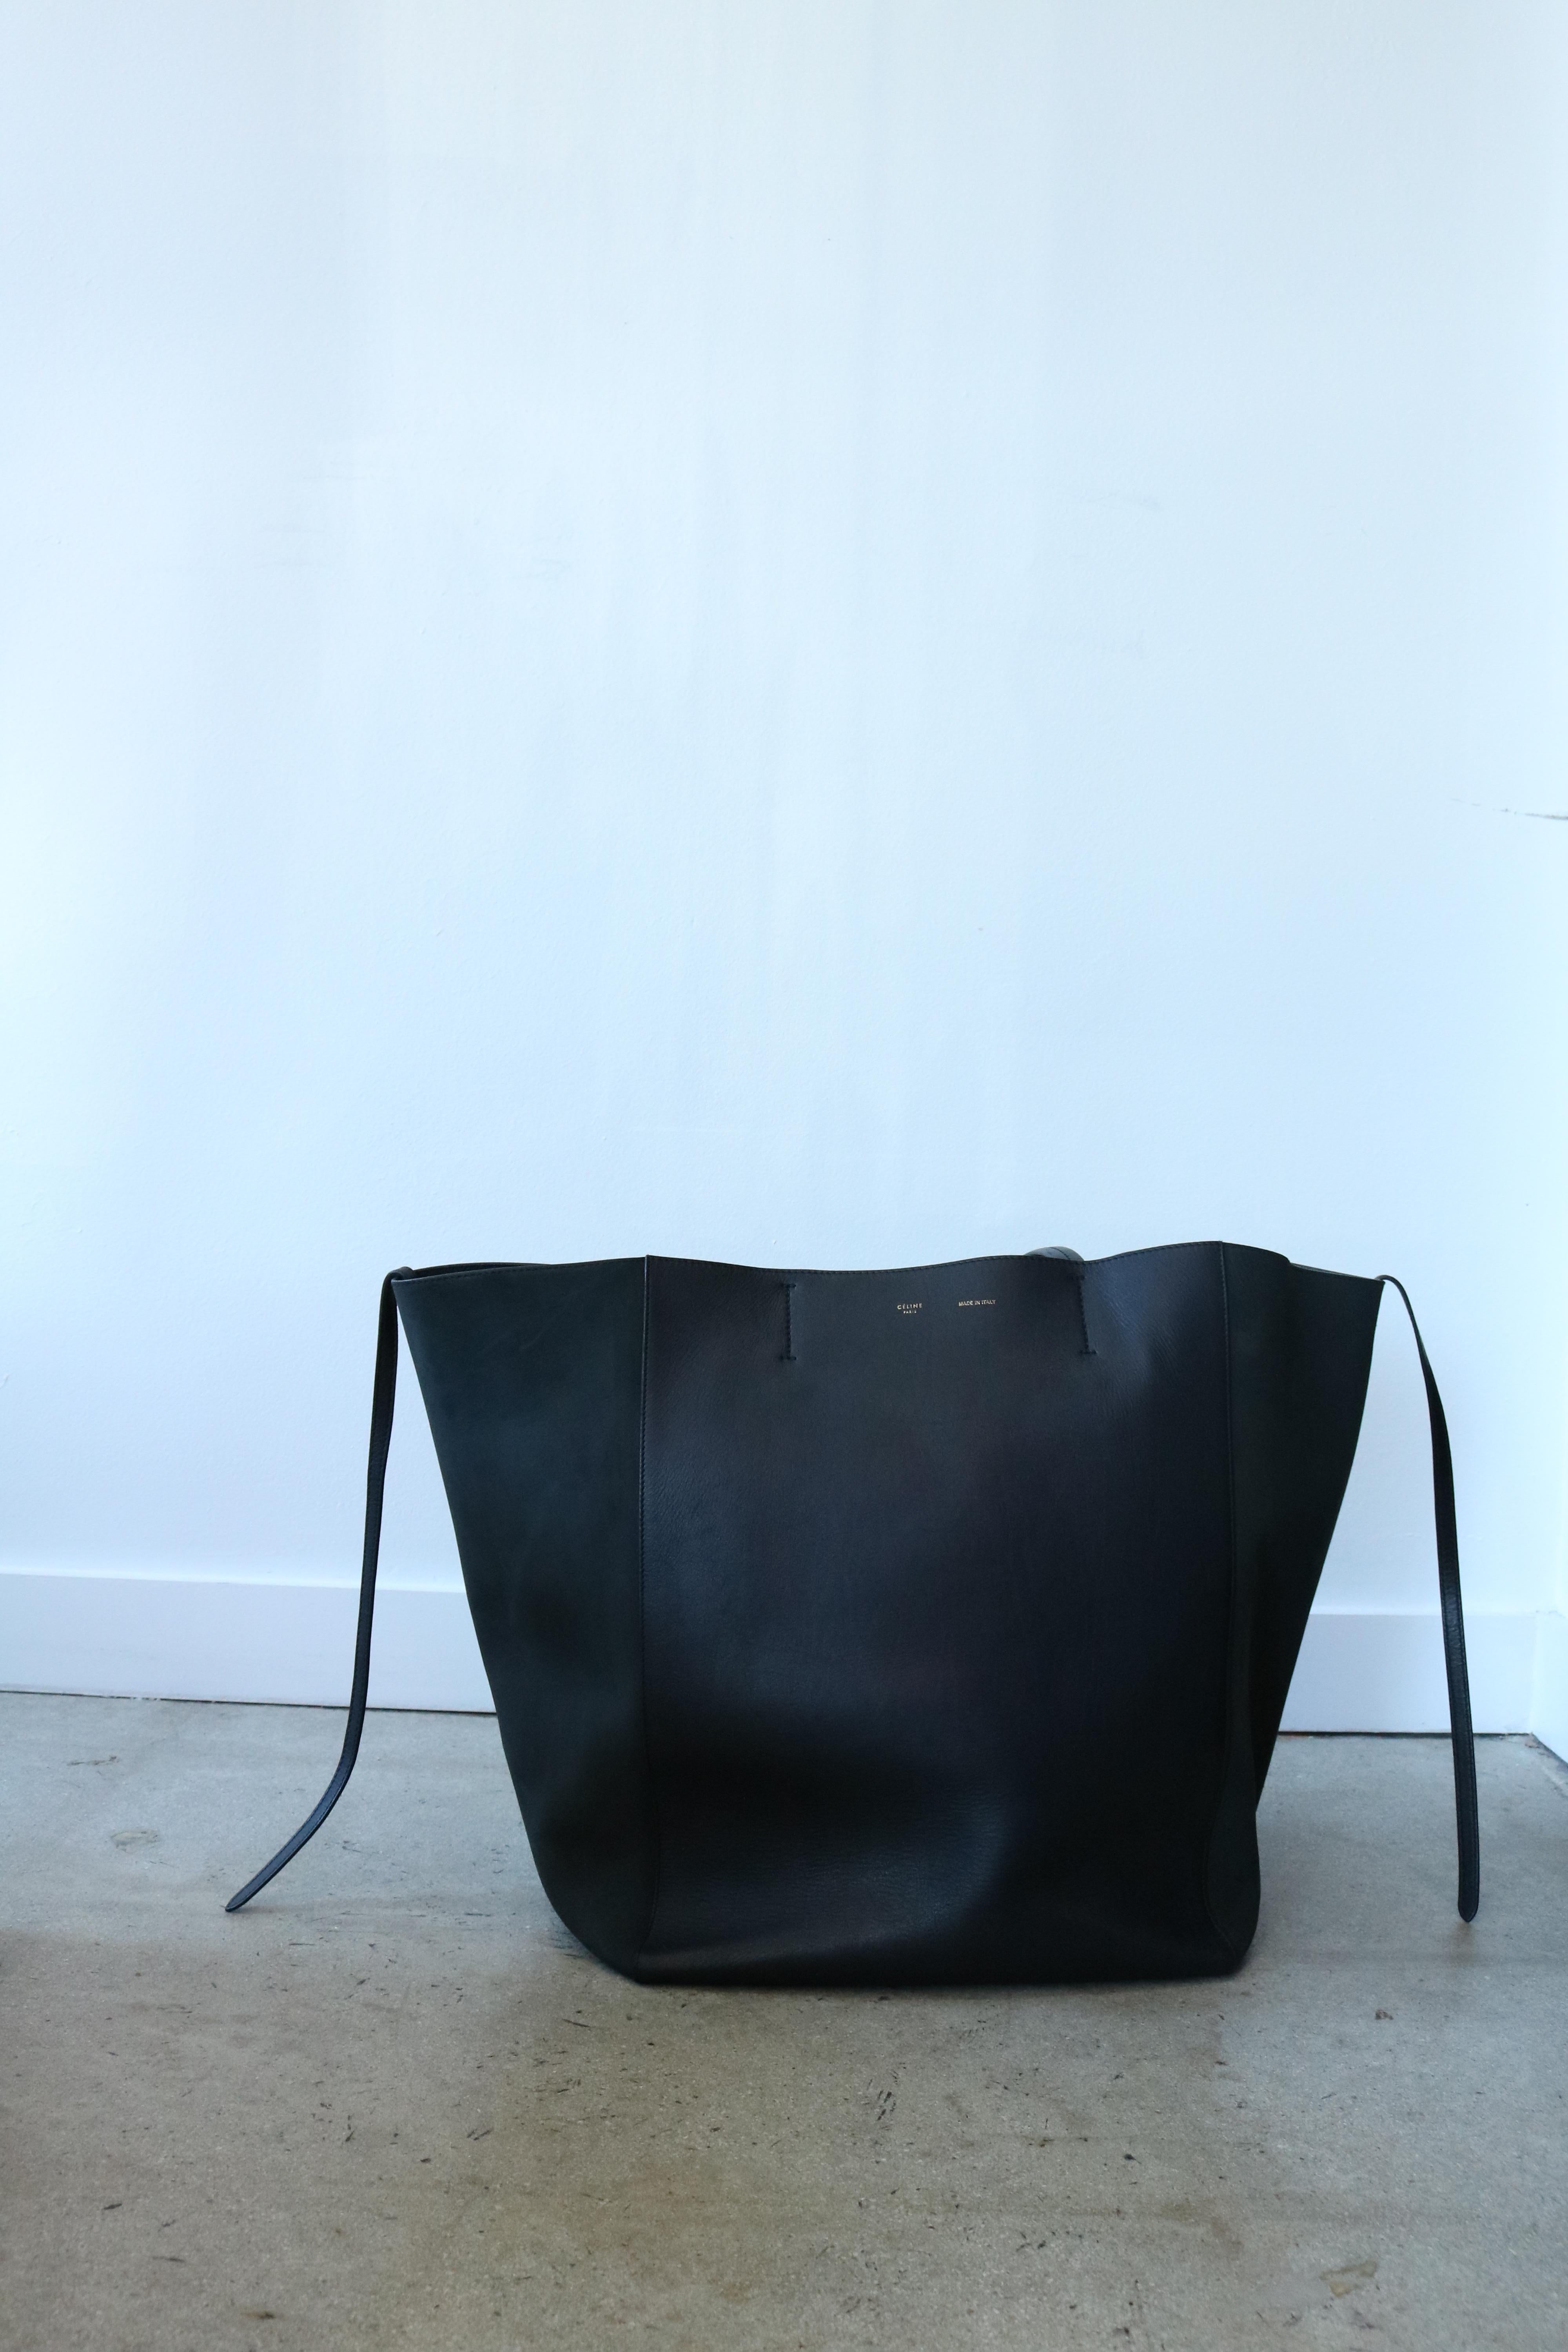 -Extra Large Celine Tote in Excellent Condition 
-Perfect as a carry-on (Can fit a labtop, passport wallet, books etc) 
- Black smooth leather, with brushed black leather on the sides 
- Ties for closure 